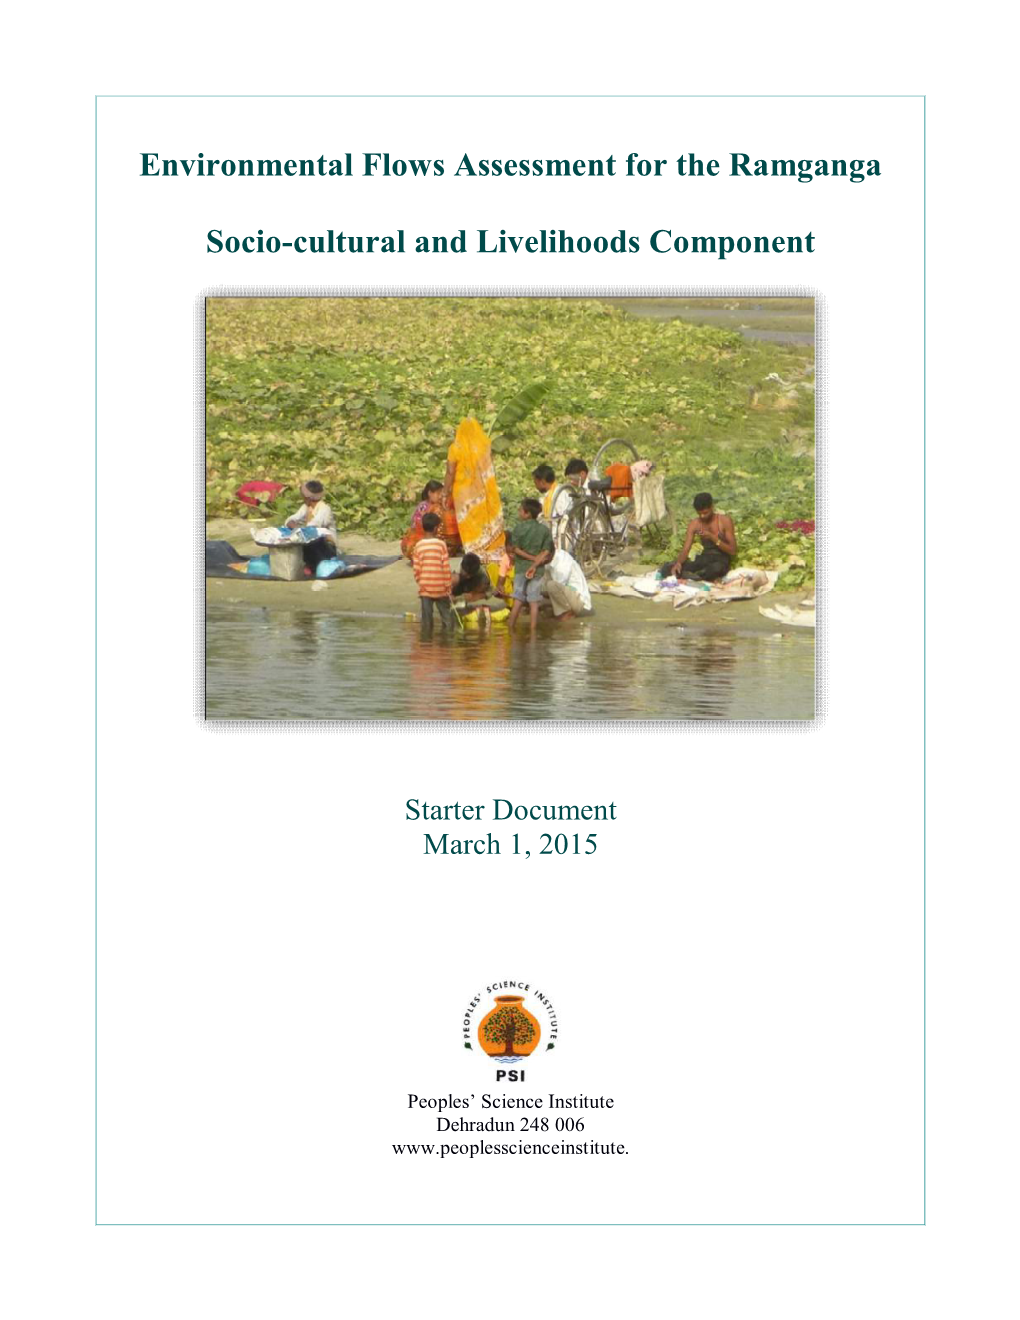 Environmental Flows Assessment for the Ramganga Socio-Cultural And